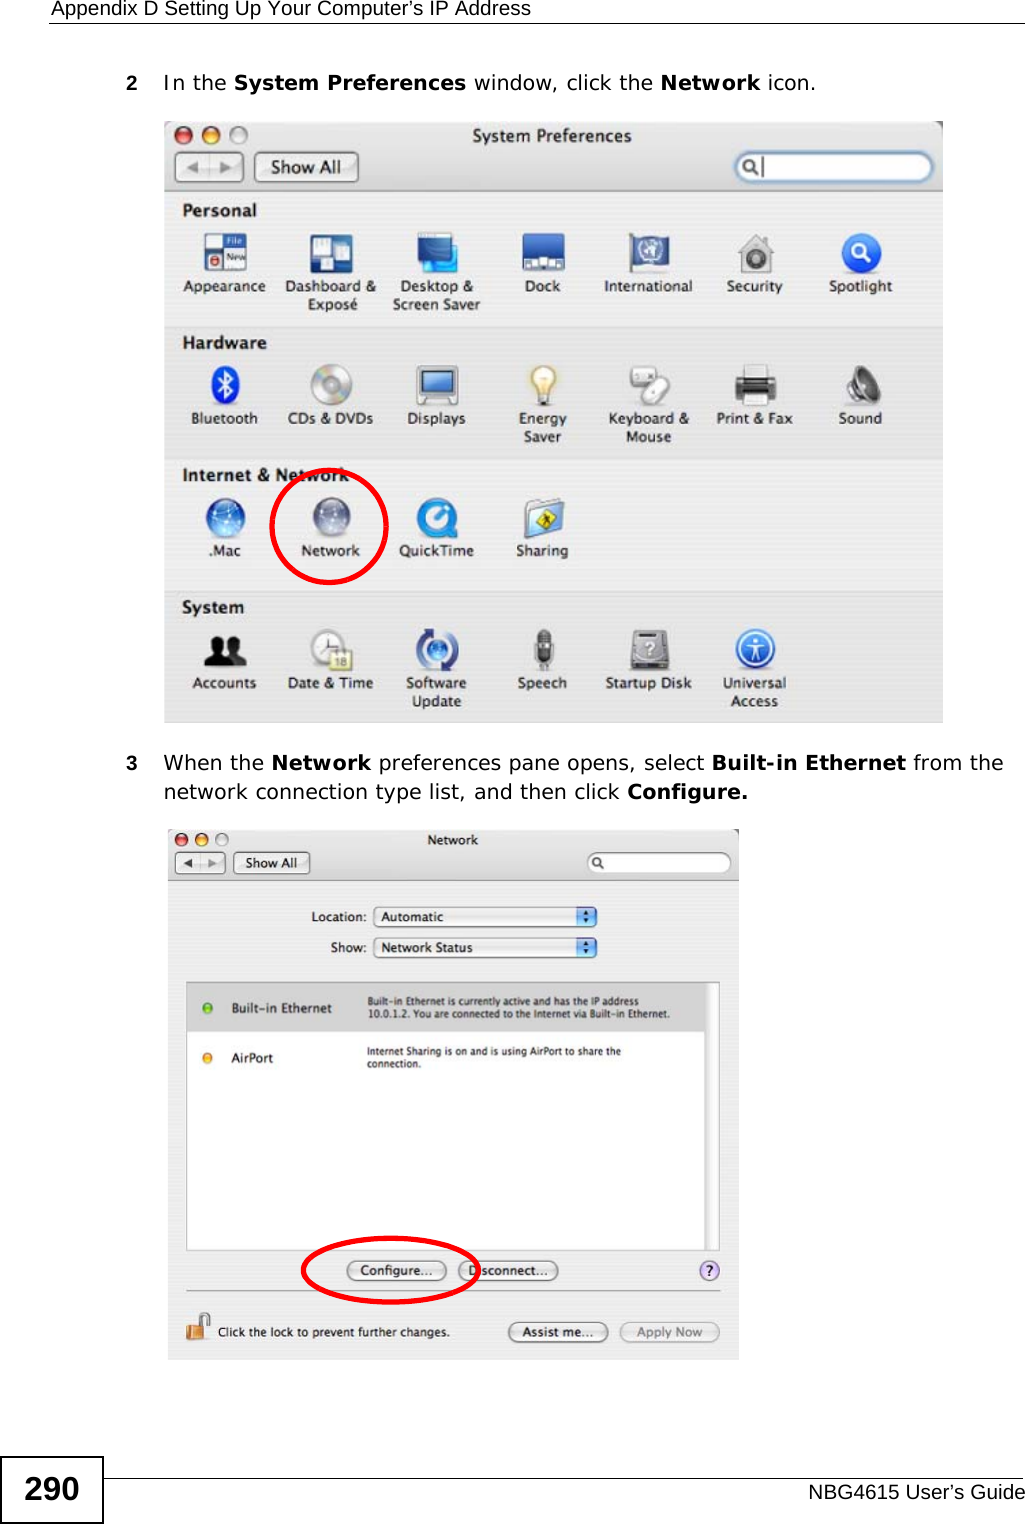 Appendix D Setting Up Your Computer’s IP AddressNBG4615 User’s Guide2902In the System Preferences window, click the Network icon.3When the Network preferences pane opens, select Built-in Ethernet from the network connection type list, and then click Configure.